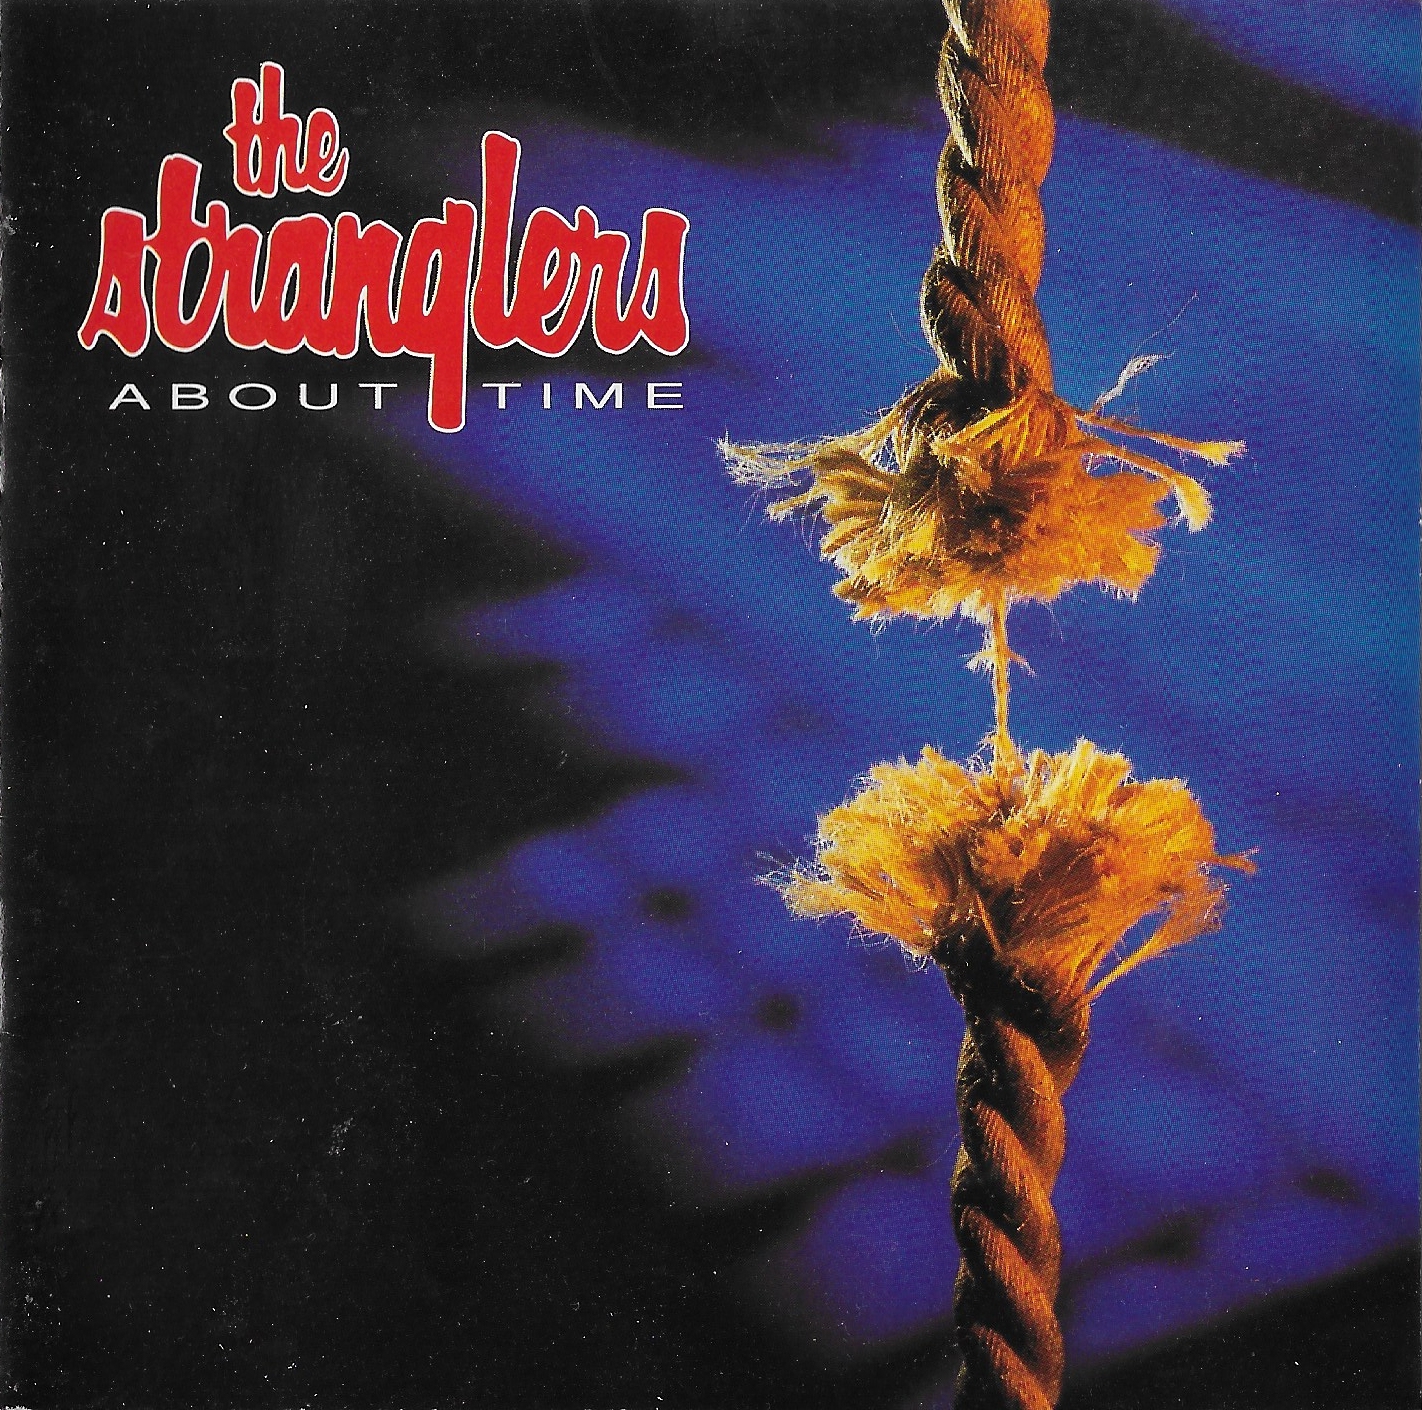 Picture of WENCD 001 About time by artist The Stranglers